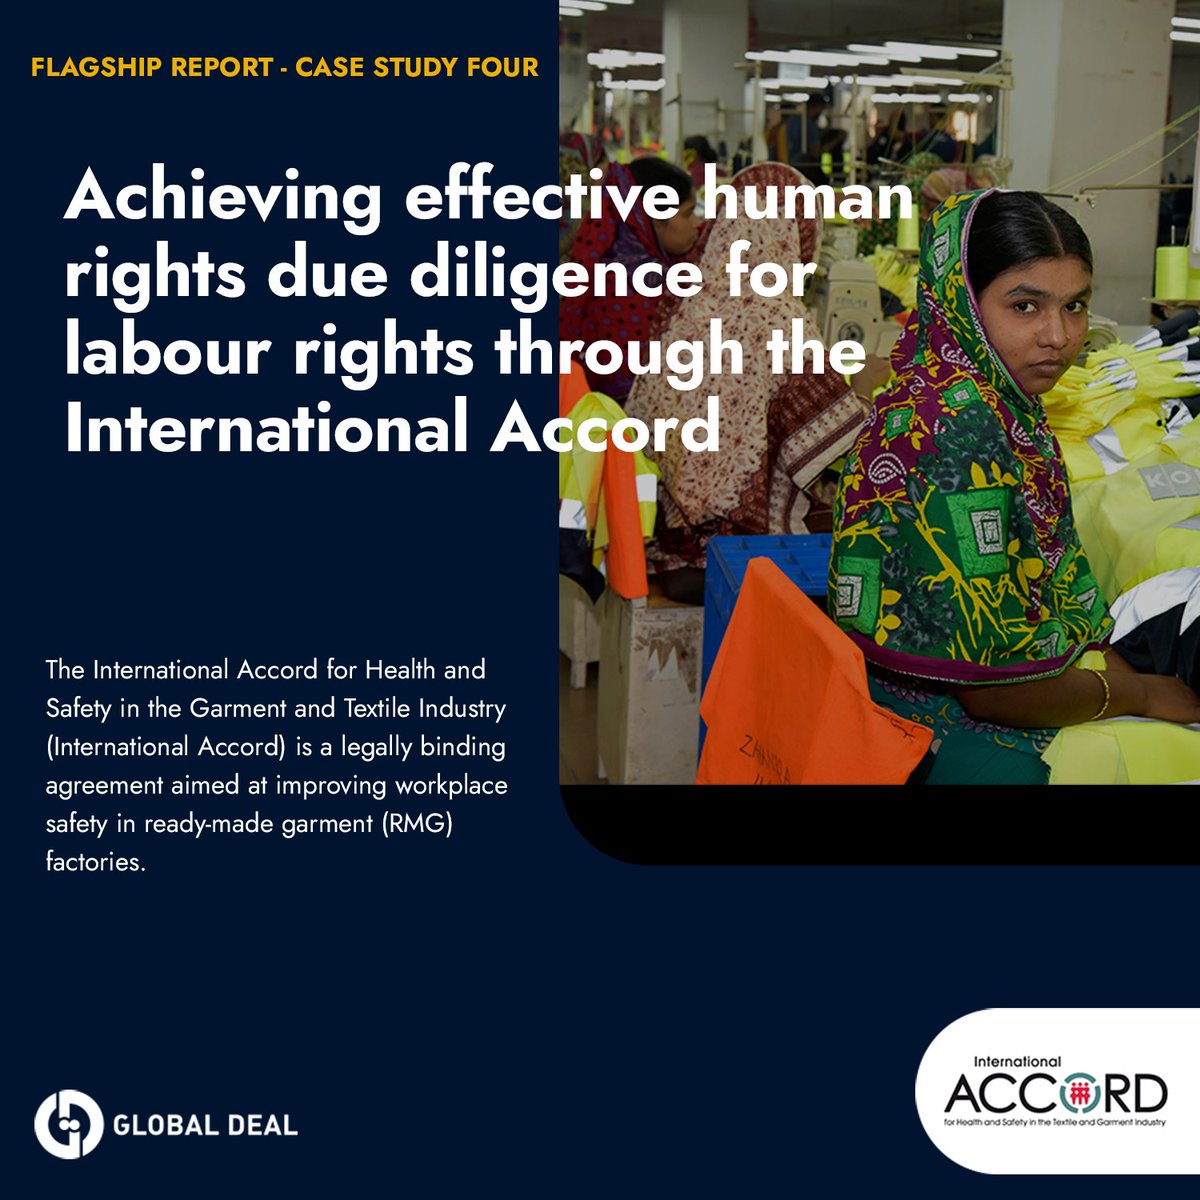 Global Deal: Case Study 4 In 2013, 2 incidents in Bangladesh's garment sector sparked the Accord on Fire & Building Safety between brands, retailers & unions. Discover the agreement, an example of social dialogue promoting human rights due diligence ➡️ brnw.ch/21wE9q2